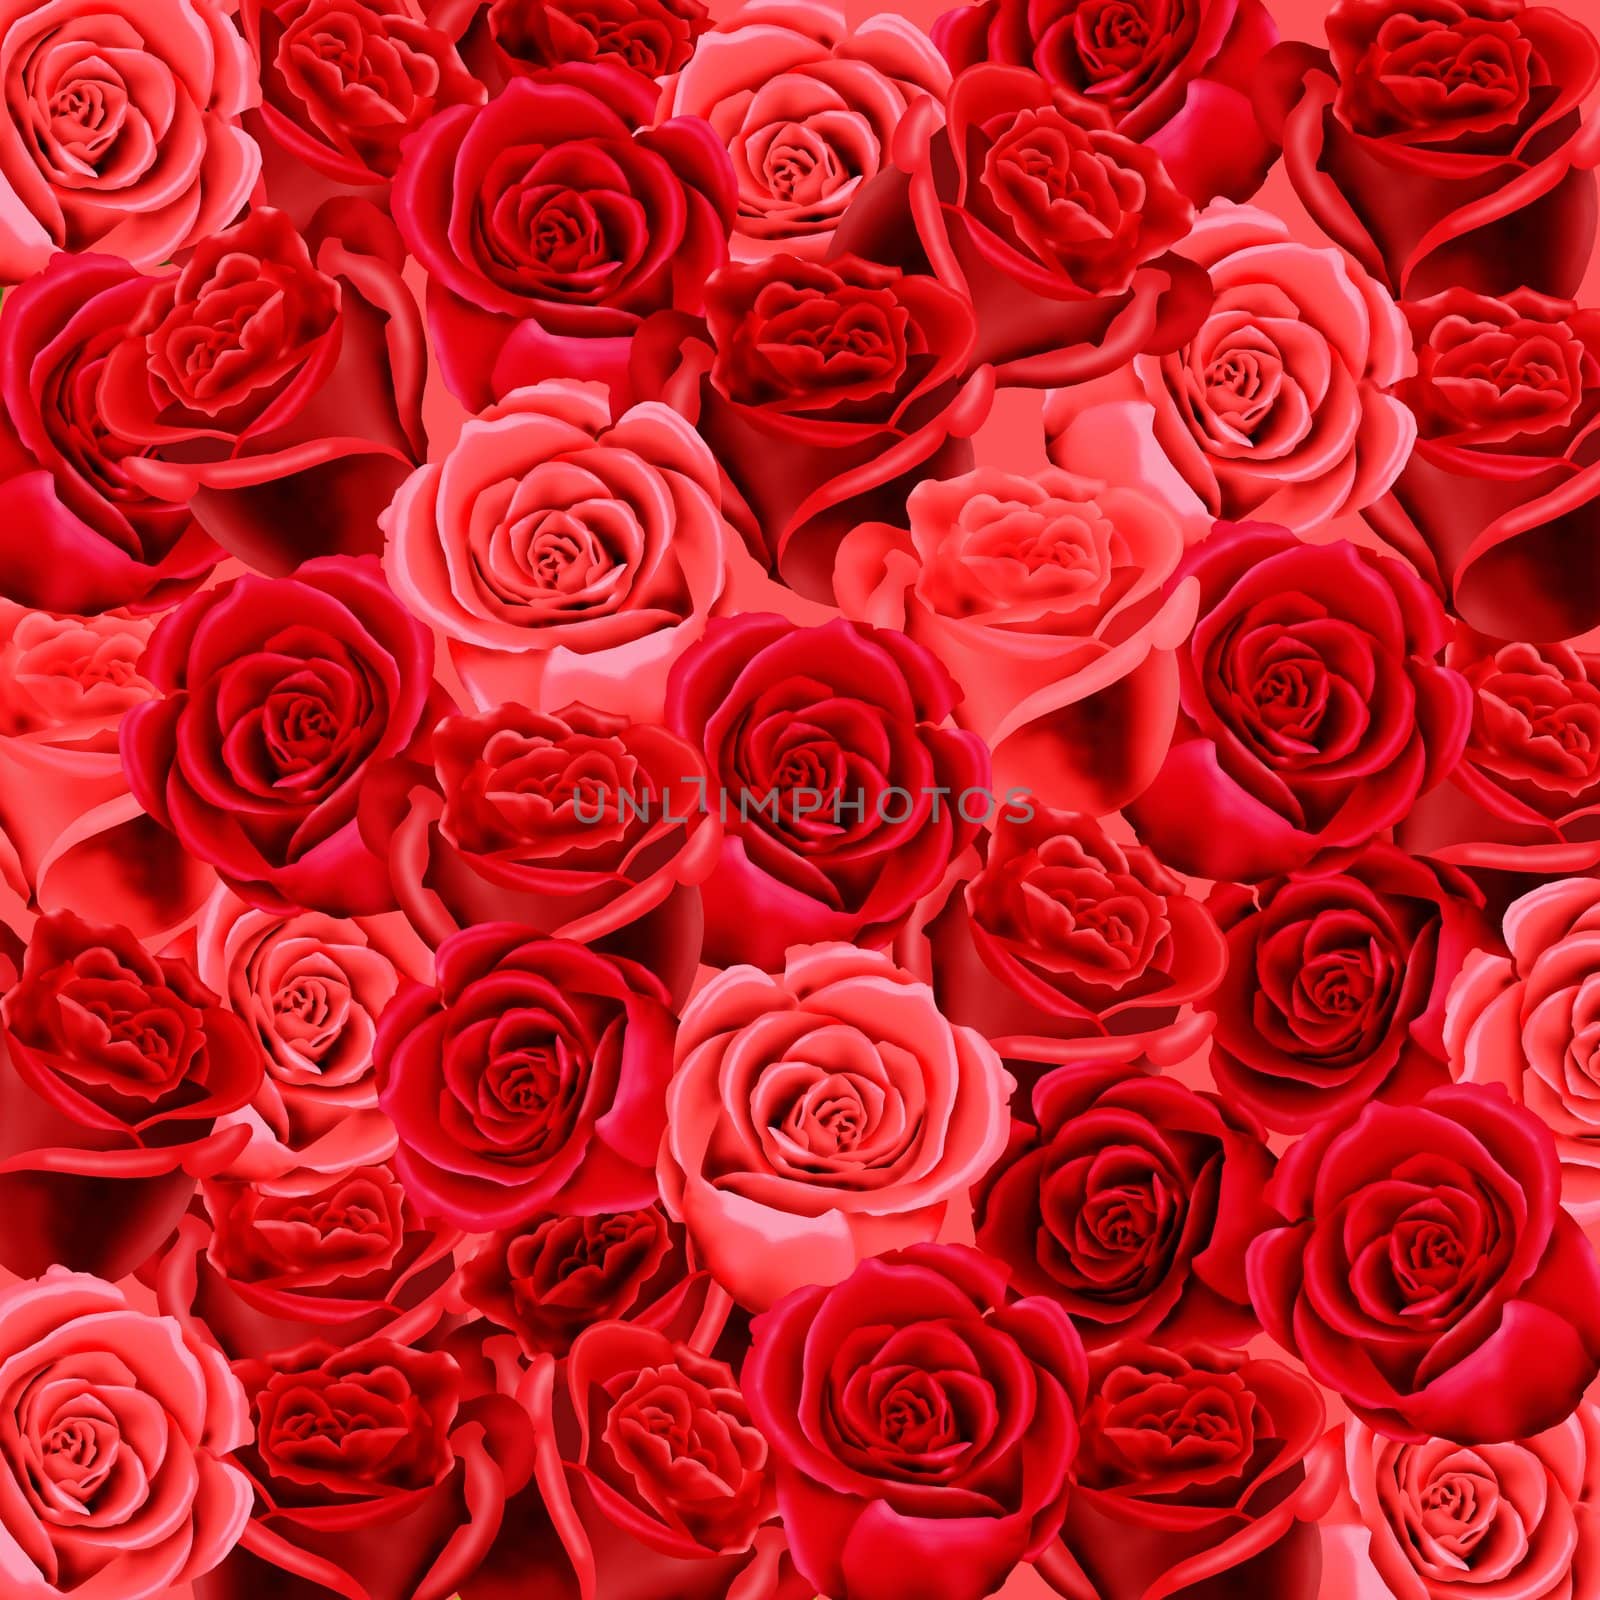 Wallpaper of red and pink roses by acremead